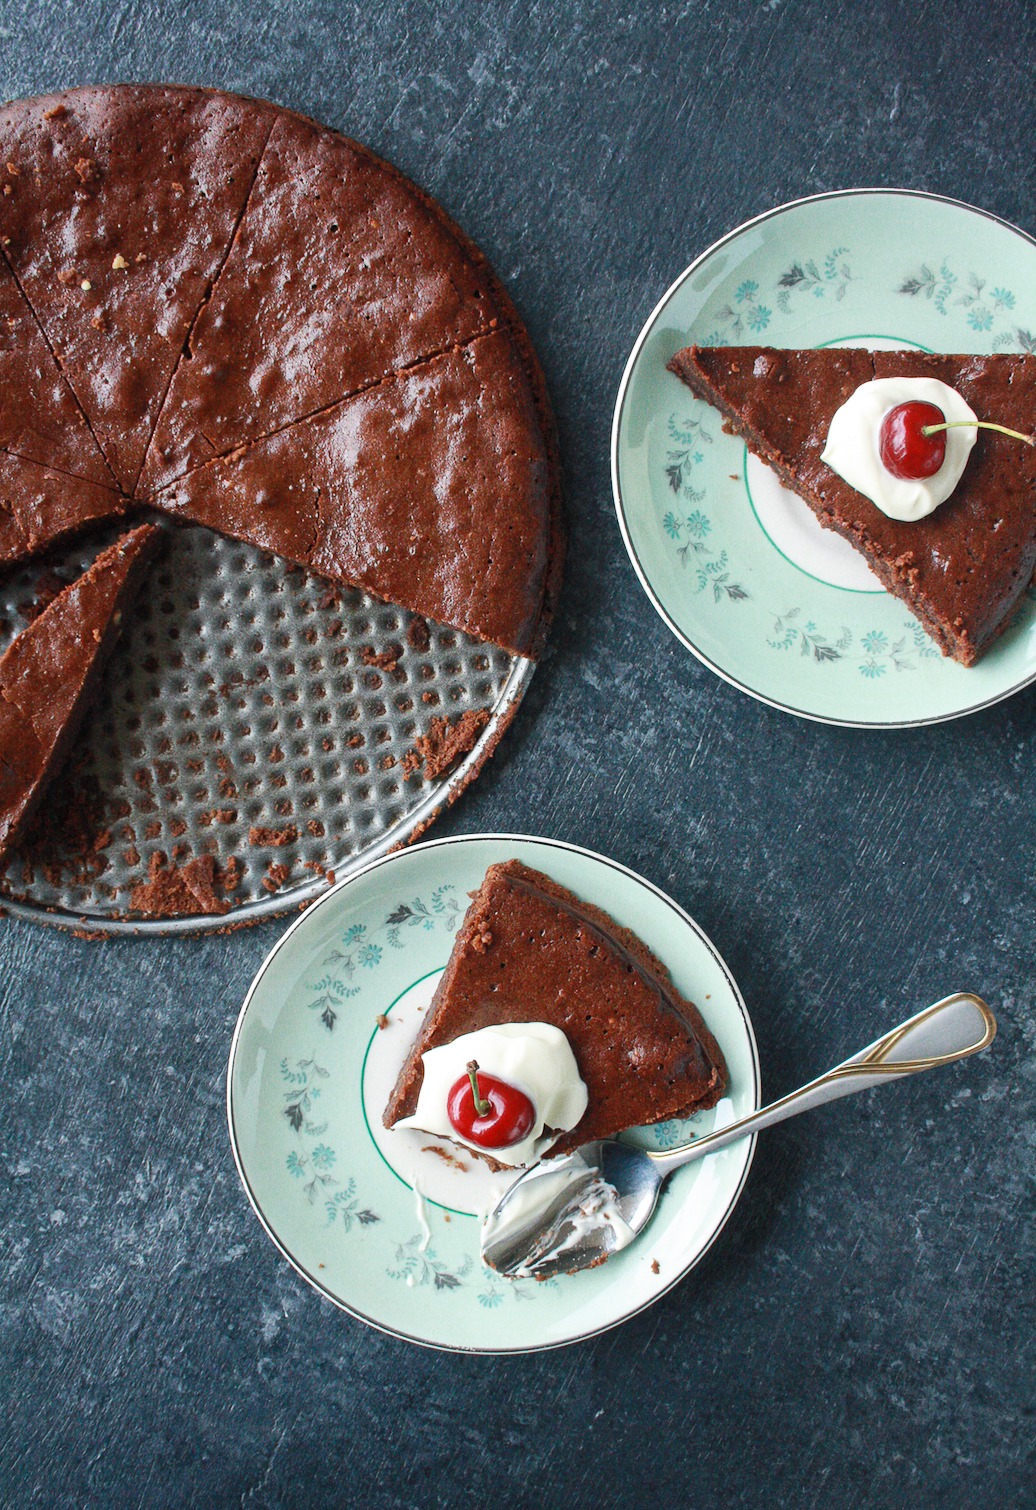 Moist and fudgy gluten-free cake made with buckwheat flour and hazelnuts